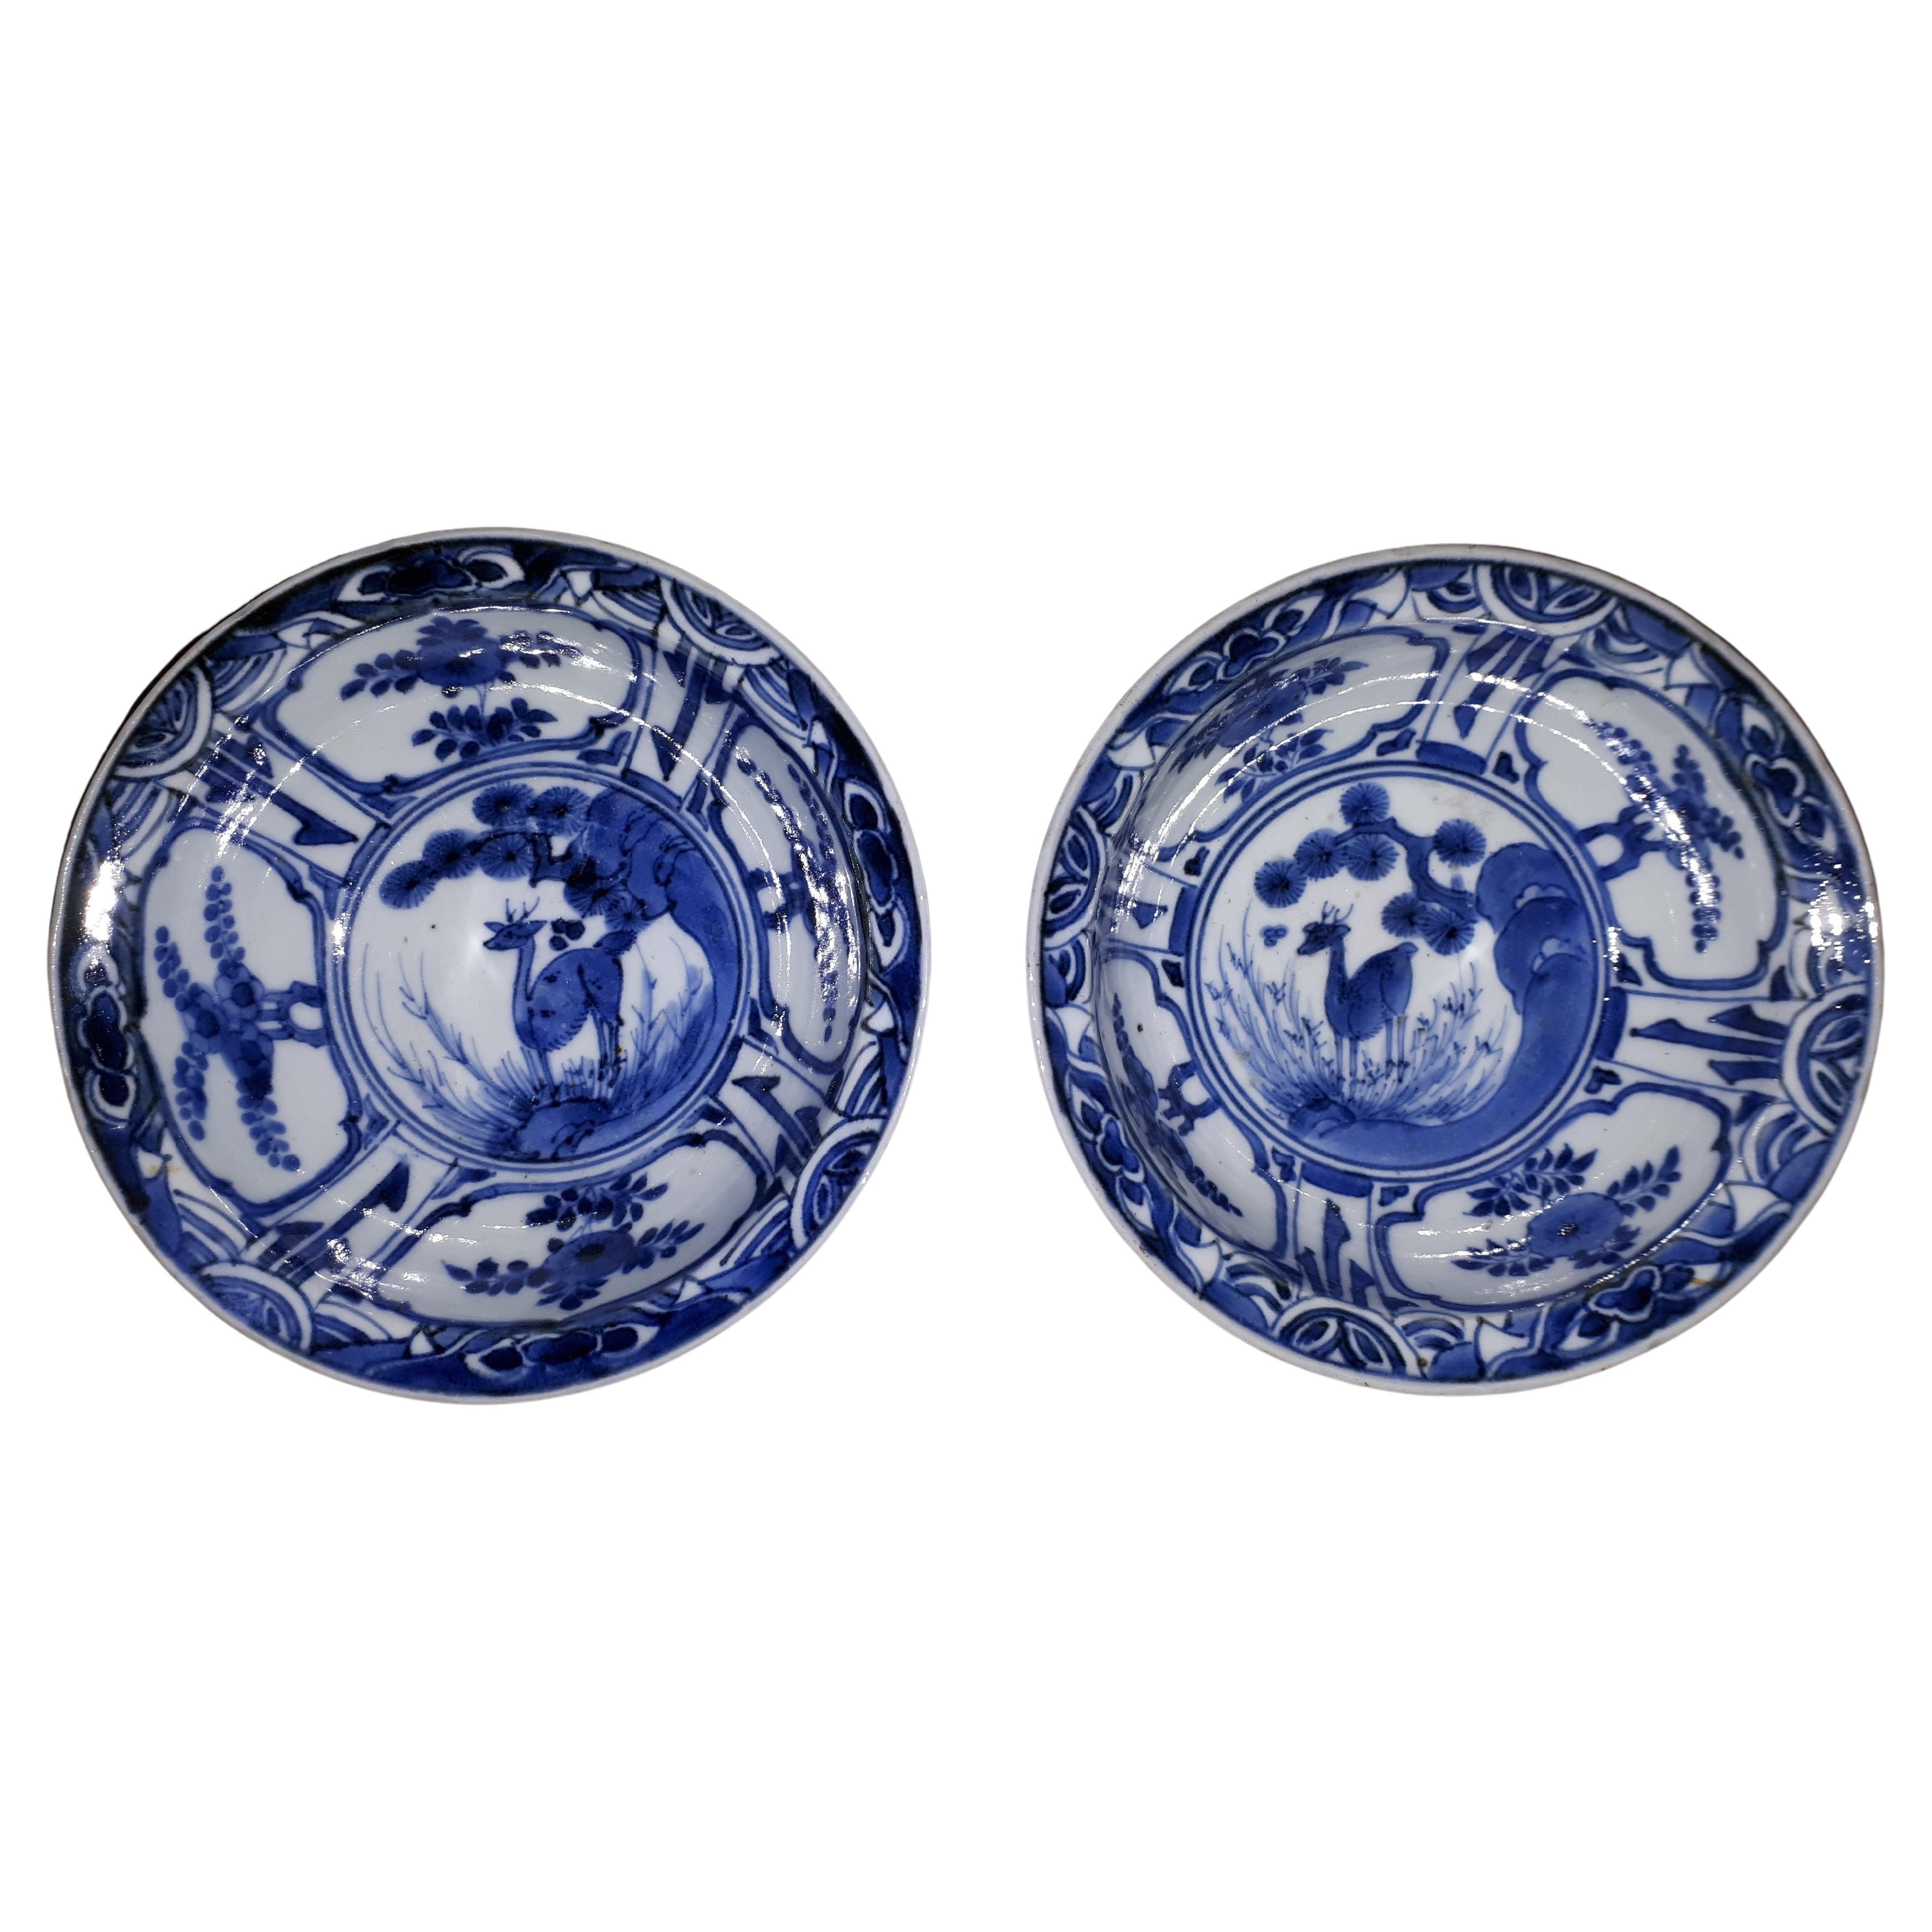 Pair Of Japanese Blue And White Hollow Plates, Japan Edo Period